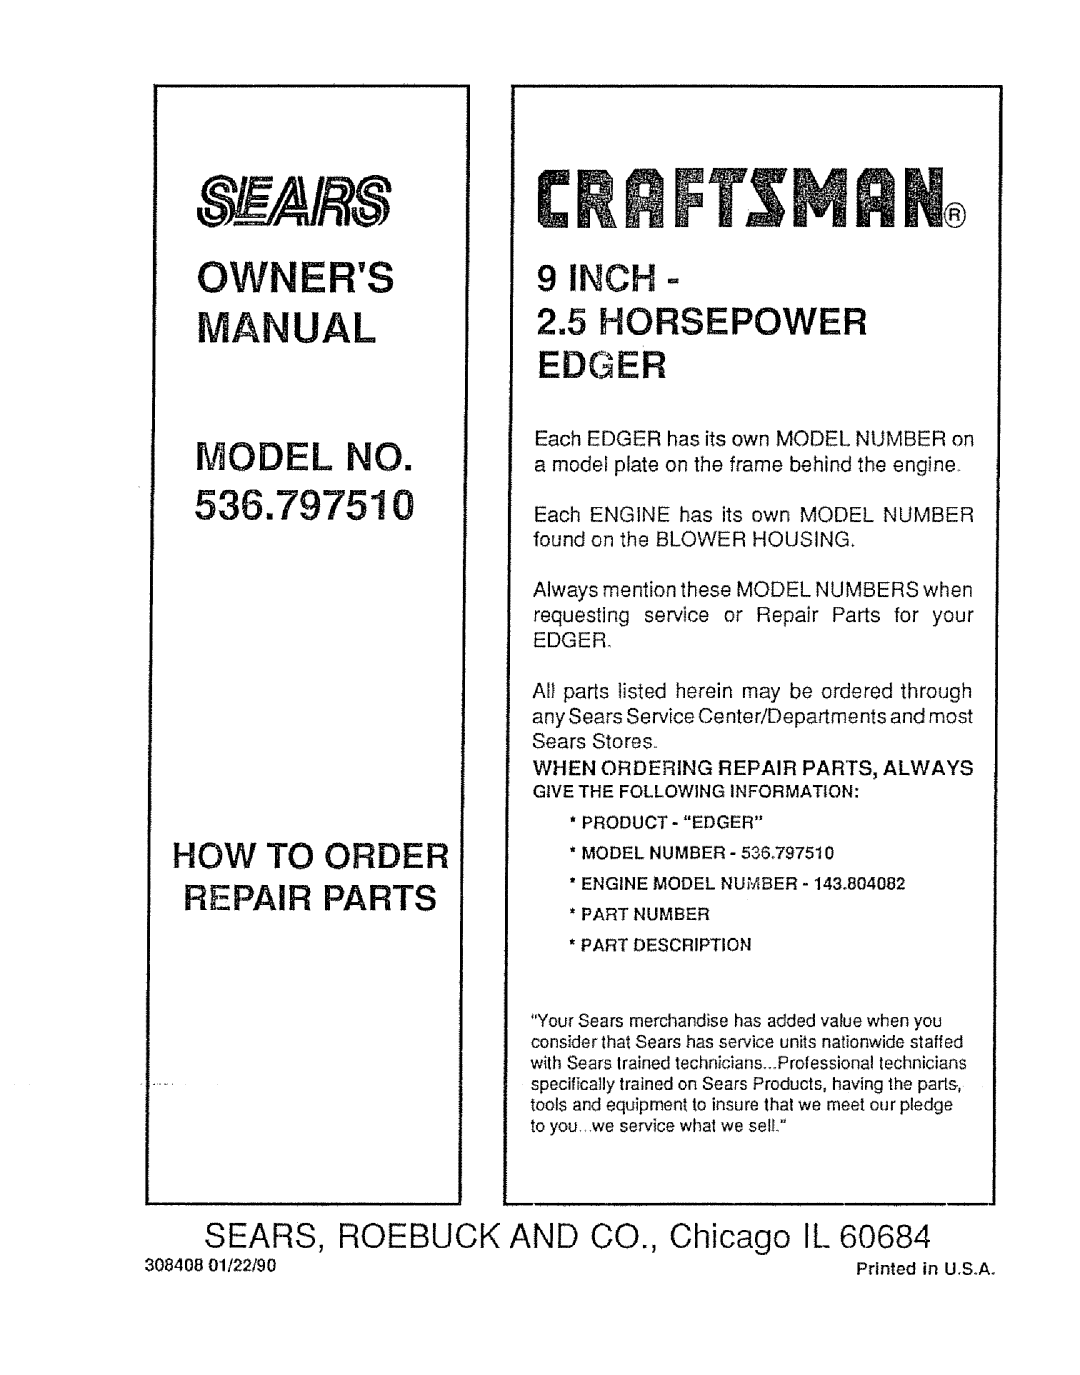 Sears 536.79751 Model No, How To Order Repair Parts, INCH 2.5HORSEPOWER EDGER, SEARS, ROEBUCK AND CO., Chicago IL 